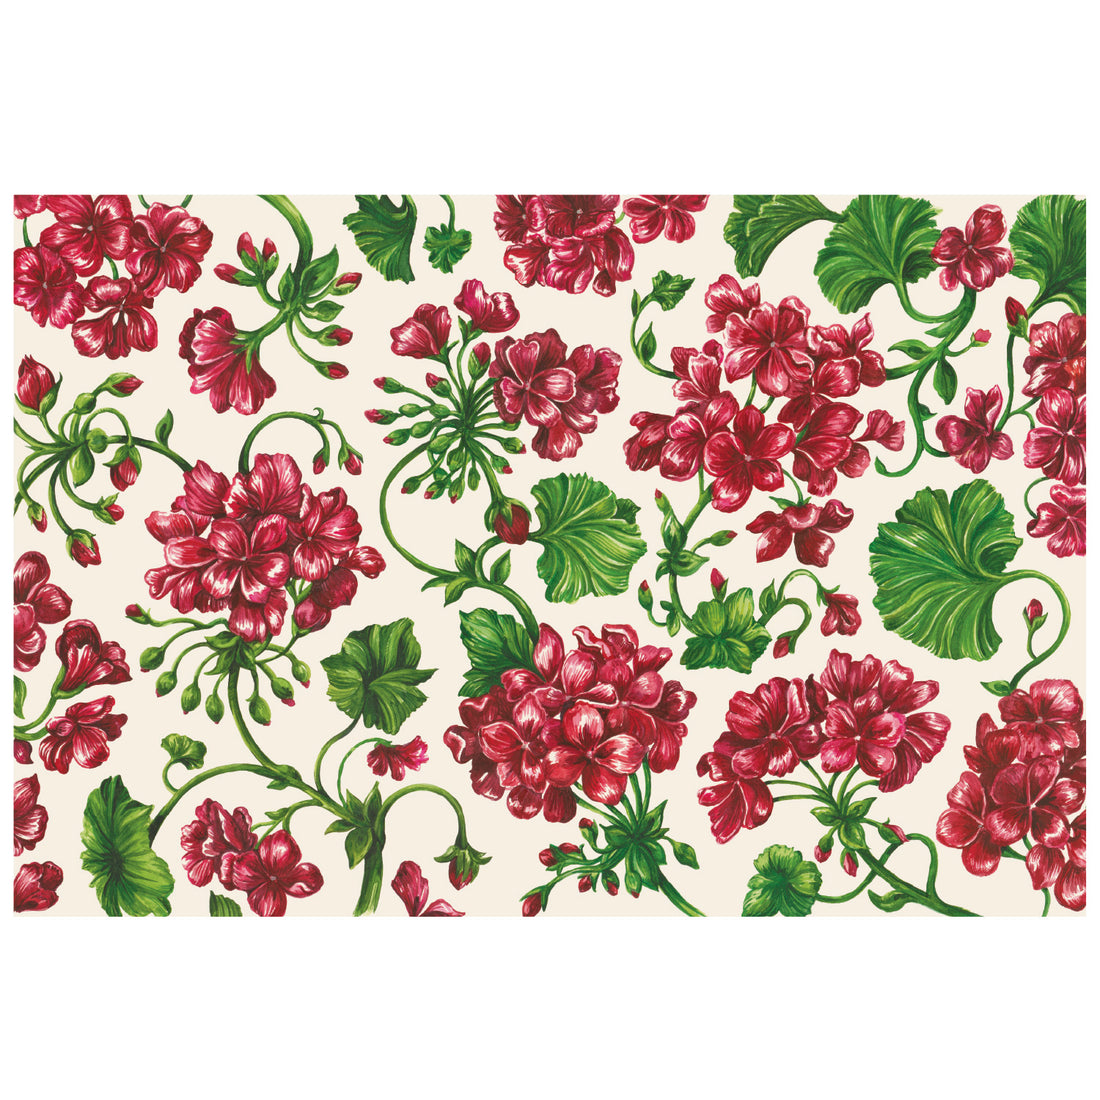 An illustrated scatter of deep red geranium blossoms with vibrant green foliage on a white background.